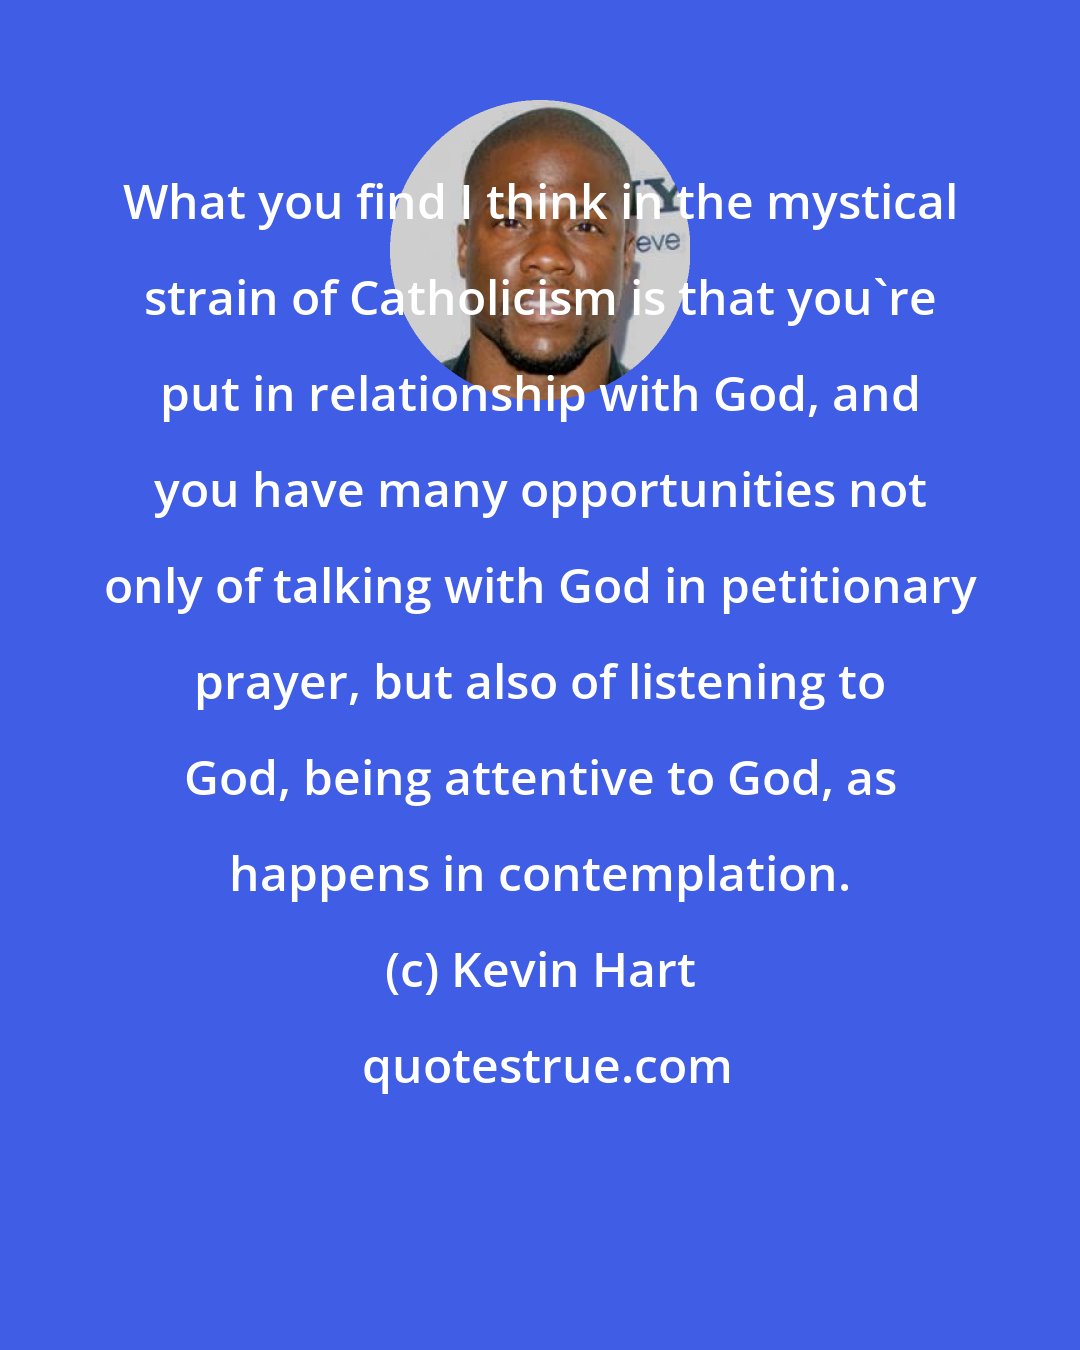 Kevin Hart: What you find I think in the mystical strain of Catholicism is that you're put in relationship with God, and you have many opportunities not only of talking with God in petitionary prayer, but also of listening to God, being attentive to God, as happens in contemplation.